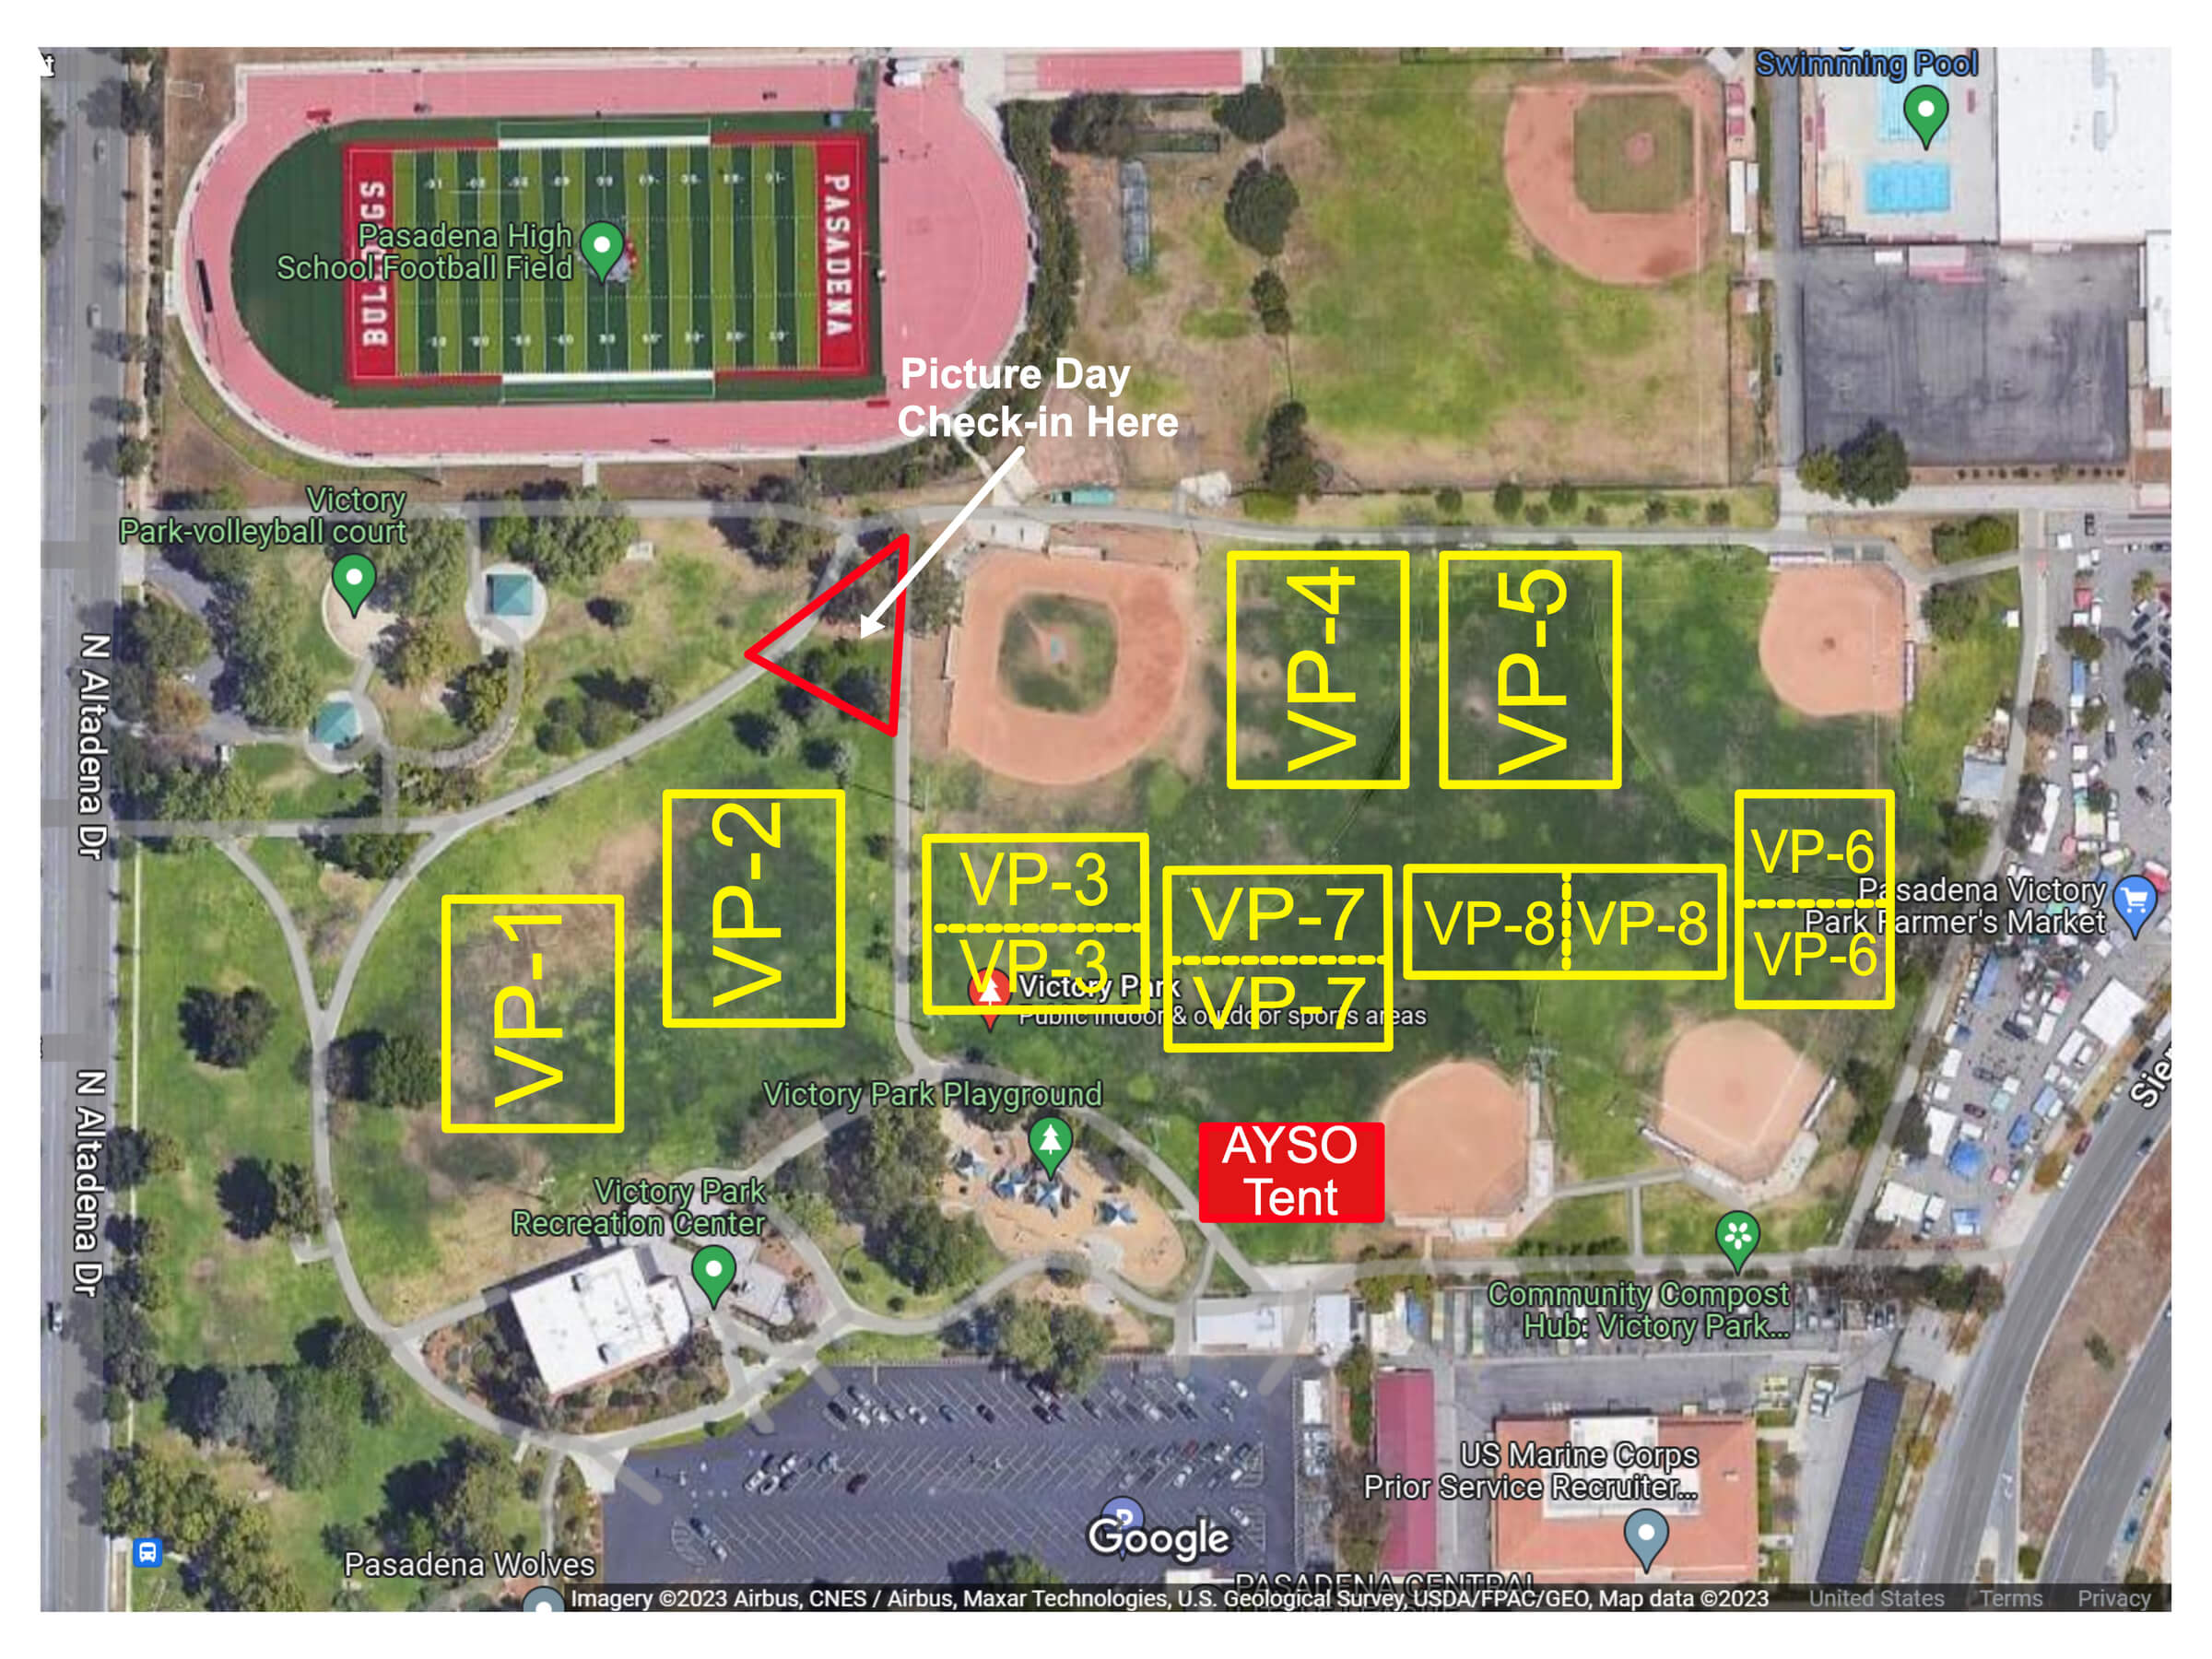 Victory Park Field Map